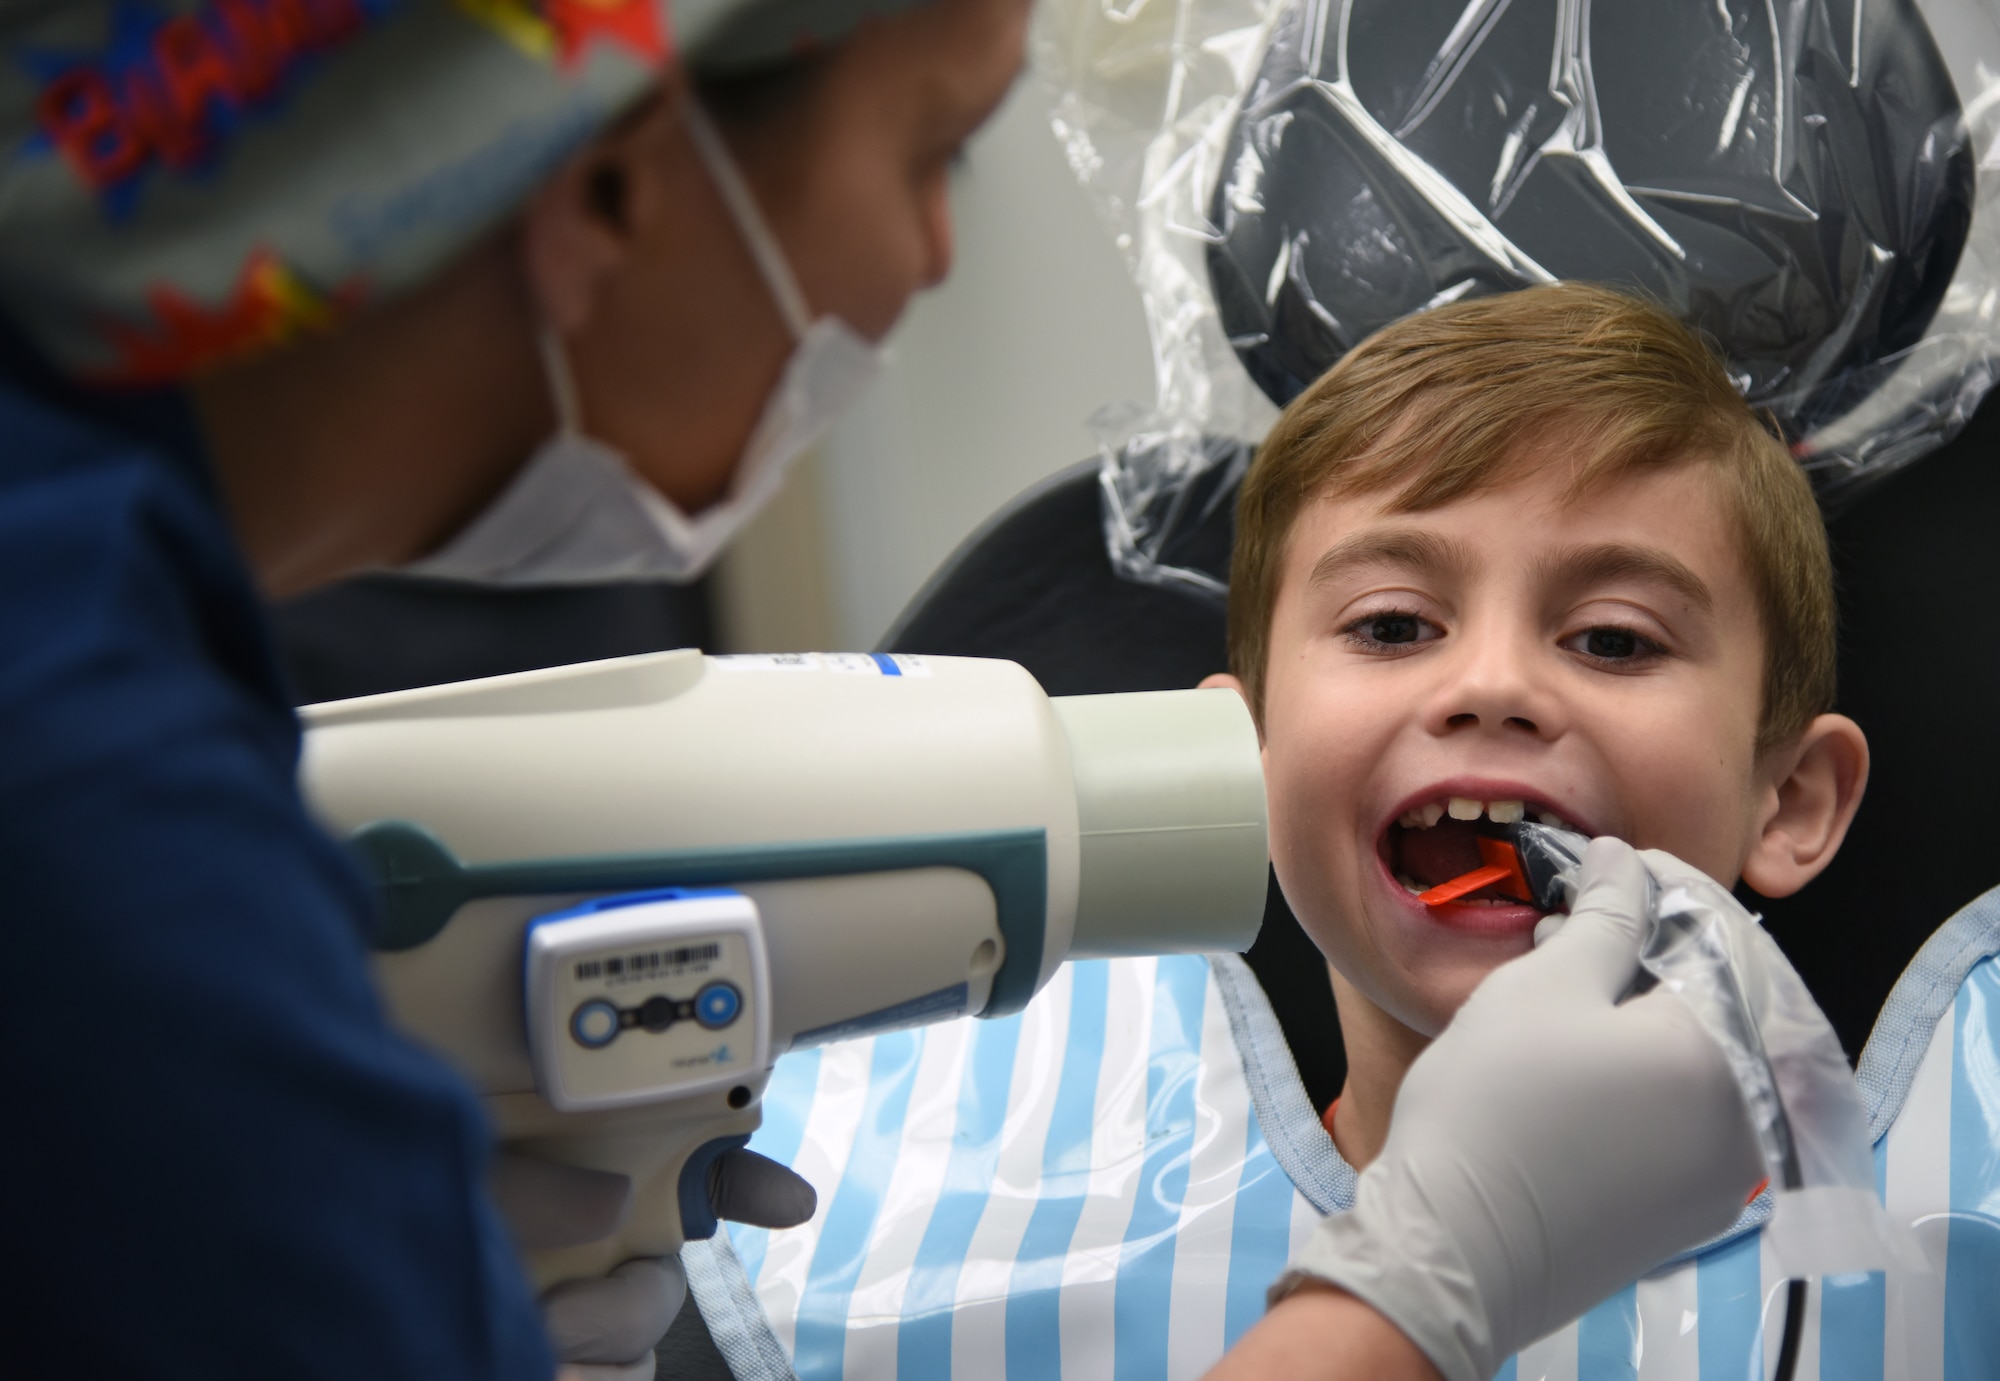 Regina Yarbrough, 81st Dental Squadron dental technician, conducts an X-ray exam on Raylan Wanhala, son of U.S. Air Force Tech. Sgt. Daniel Wanhala, 81st Security Forces Squadron flight chief, during the 9th Annual Give Kids a Smile Day at the dental clinic inside the Keesler Medical Center at Keesler Air Force Base, Mississippi, Feb. 15, 2019. The event was held in recognition of National Children’s Dental Health Month and included free dental exams, radiographs and cleanings for children age two and older for more than 60 children. The clinic provided approximately $16,000 in care during the free screening. (U.S. Air Force photo by Kemberly Groue)